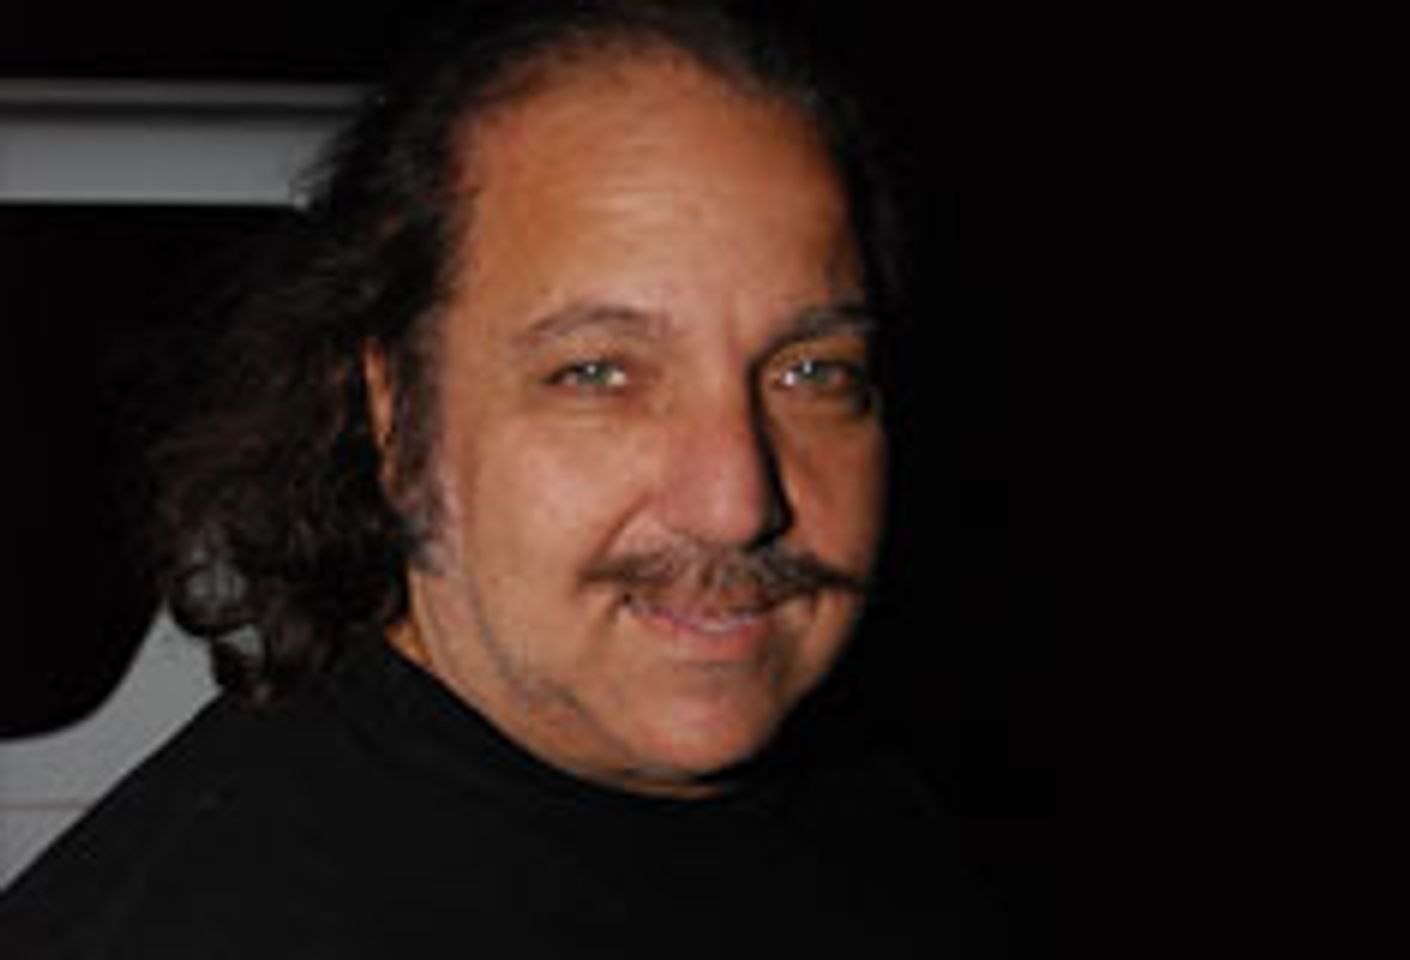 Ron Jeremy Licensed to Handle Dangerous Animals